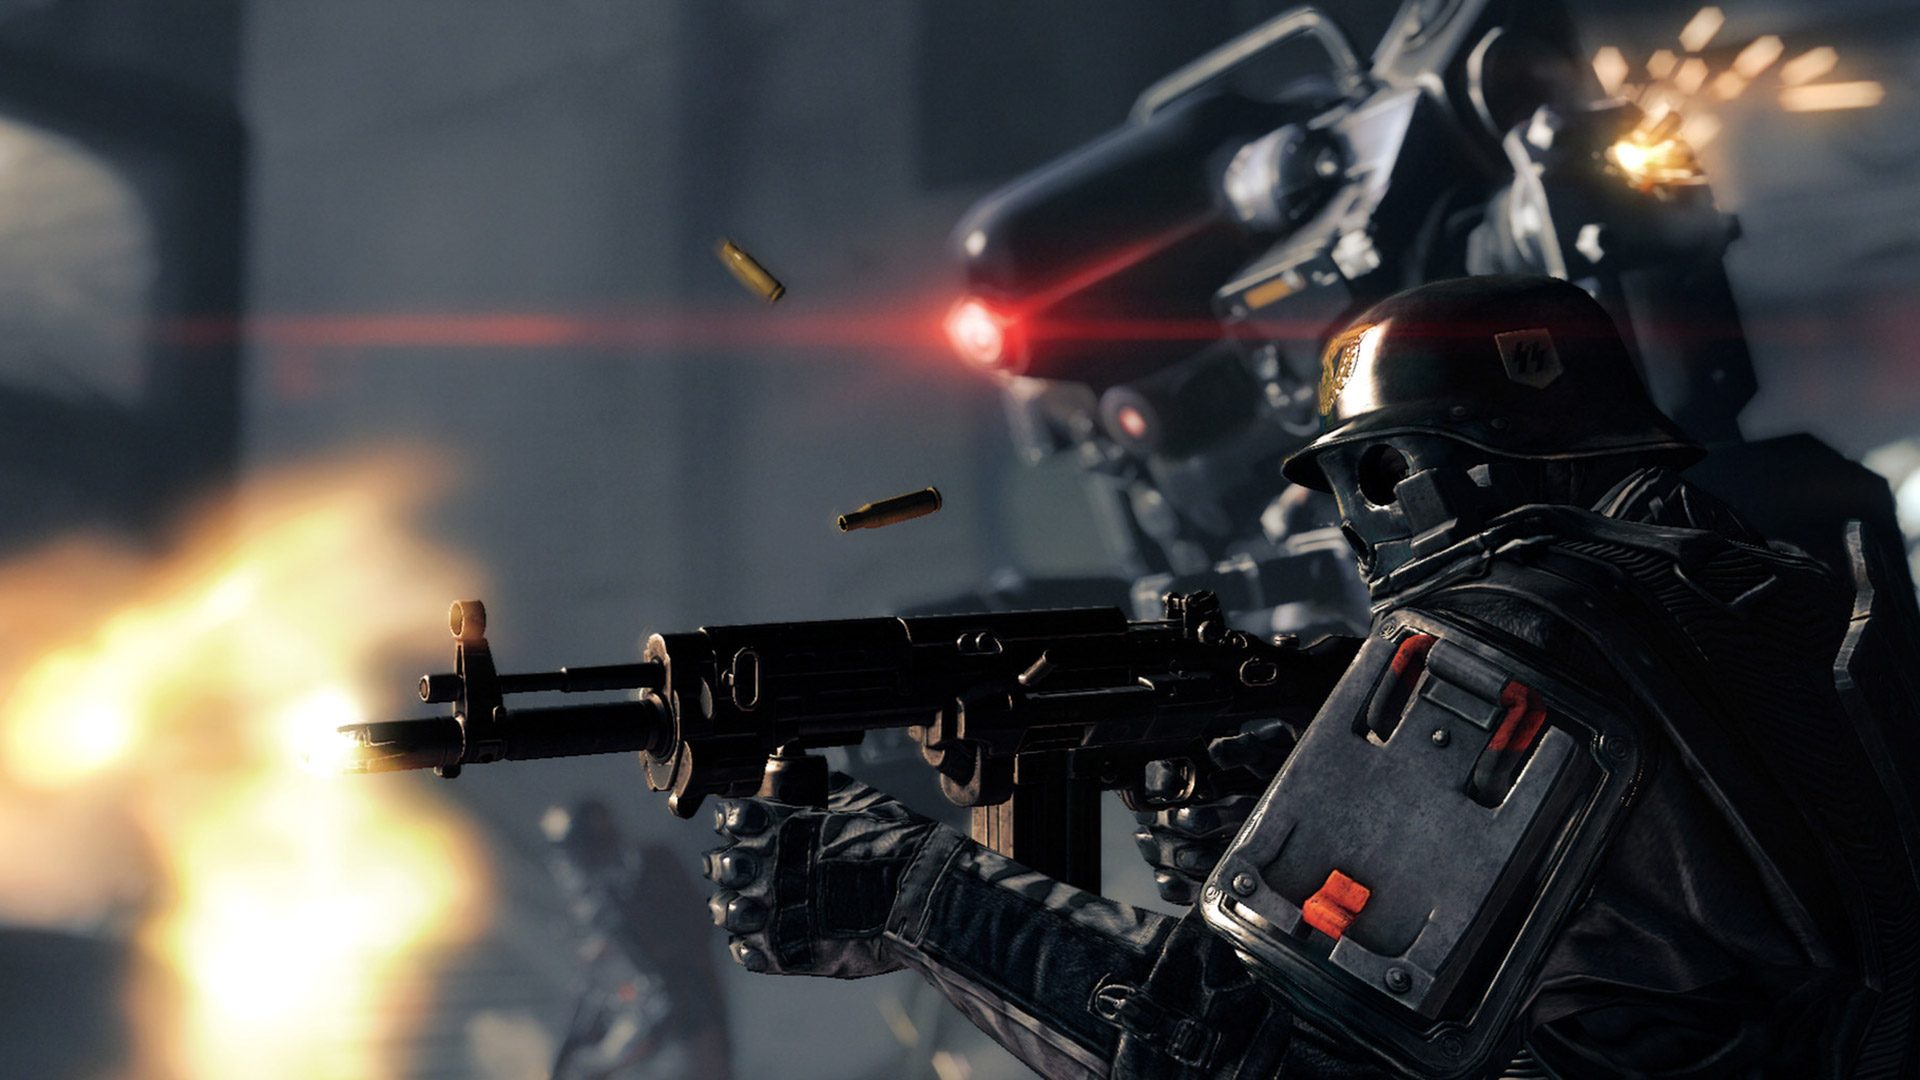 Wolfenstein: The New Order is available for free on Epic Games Store